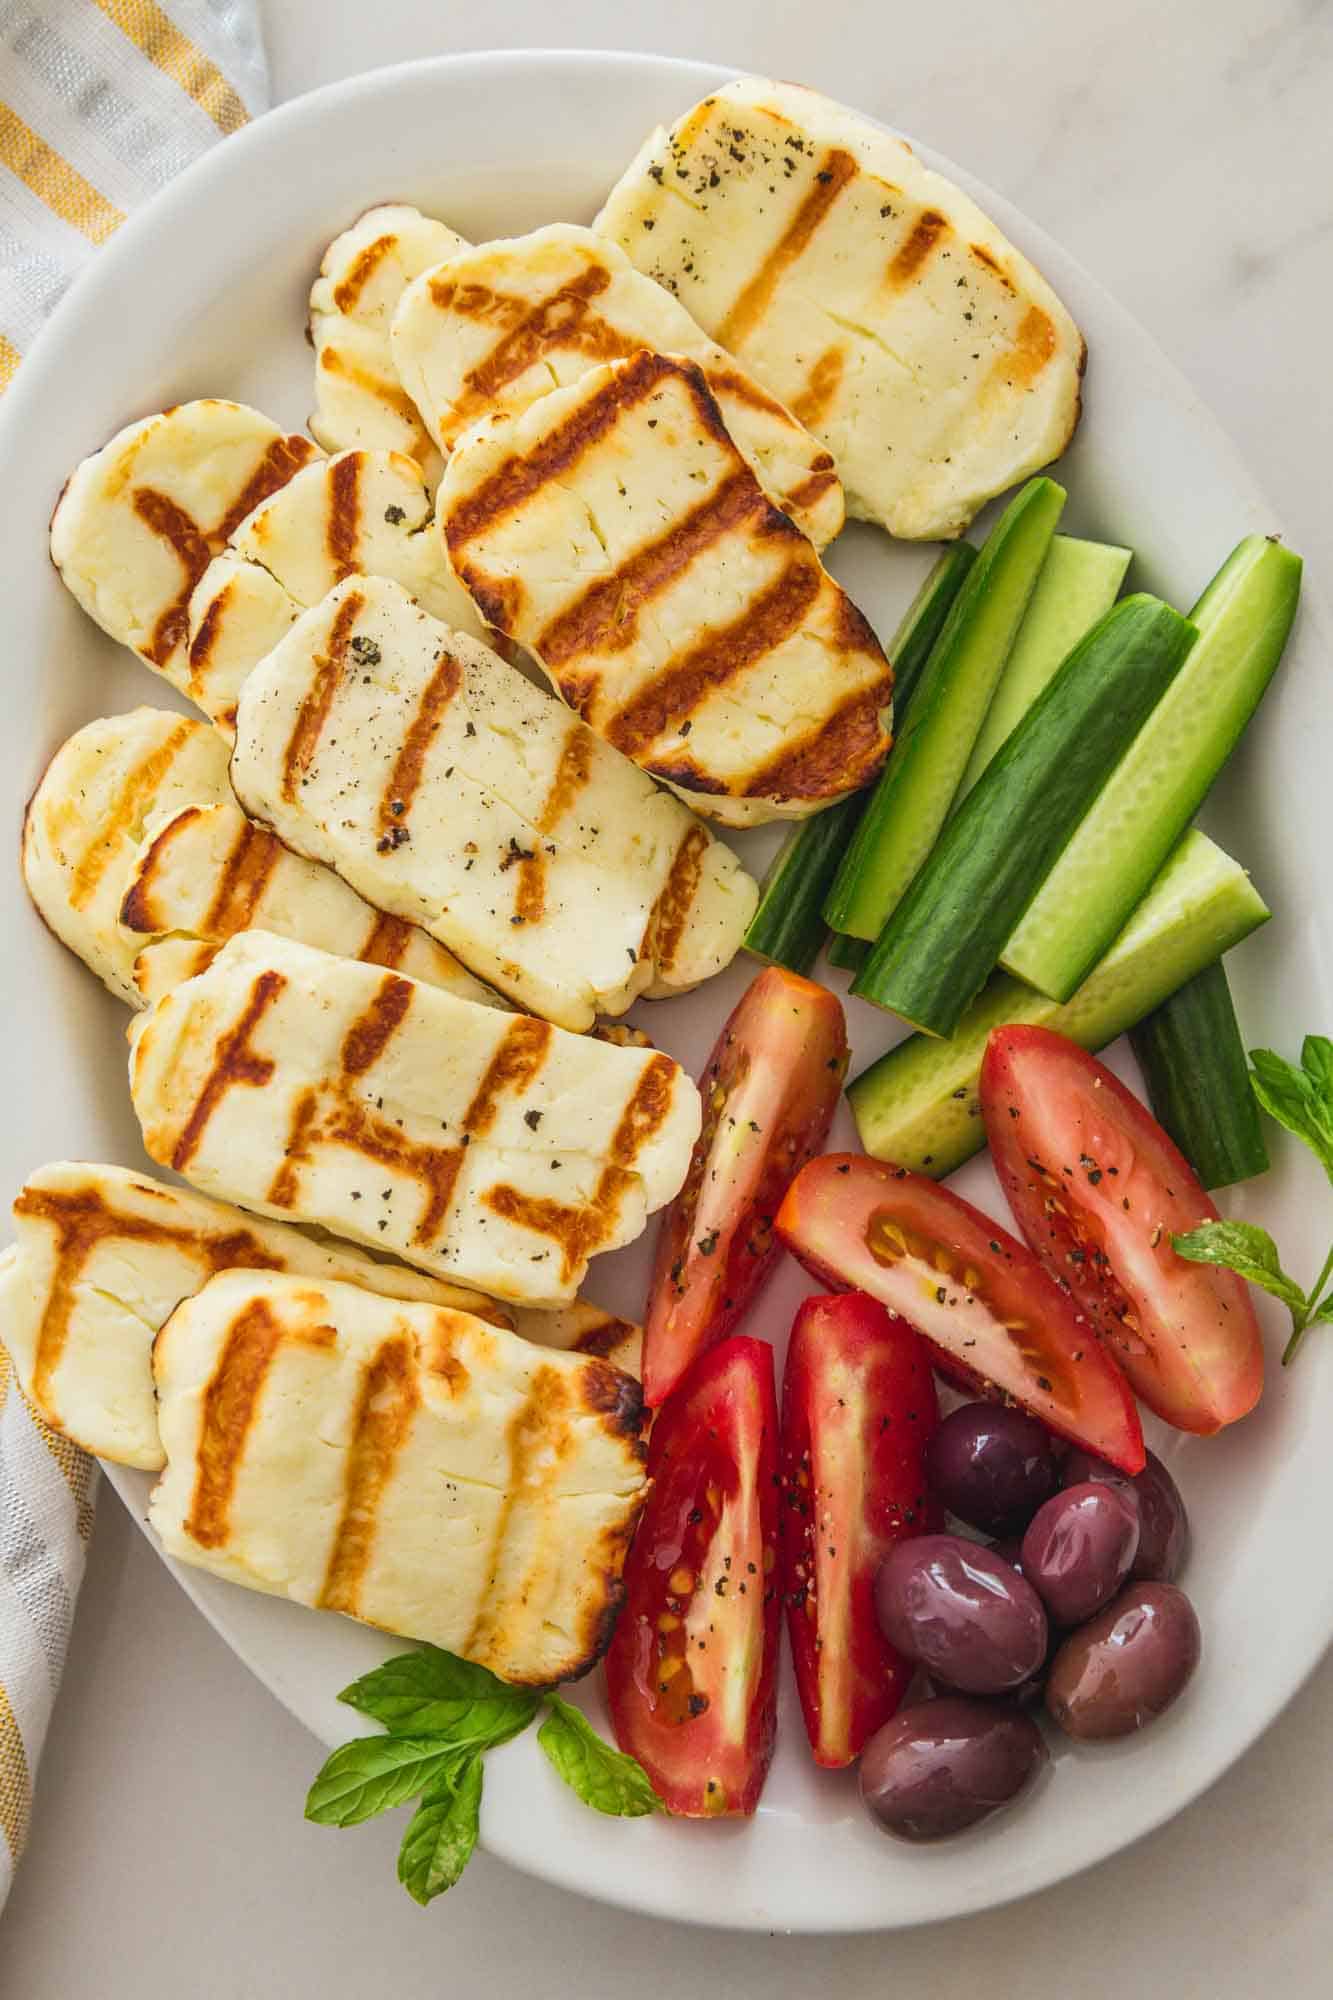 Grilled halloumi on a plate with sliced cucumber, tomatoes, and olives